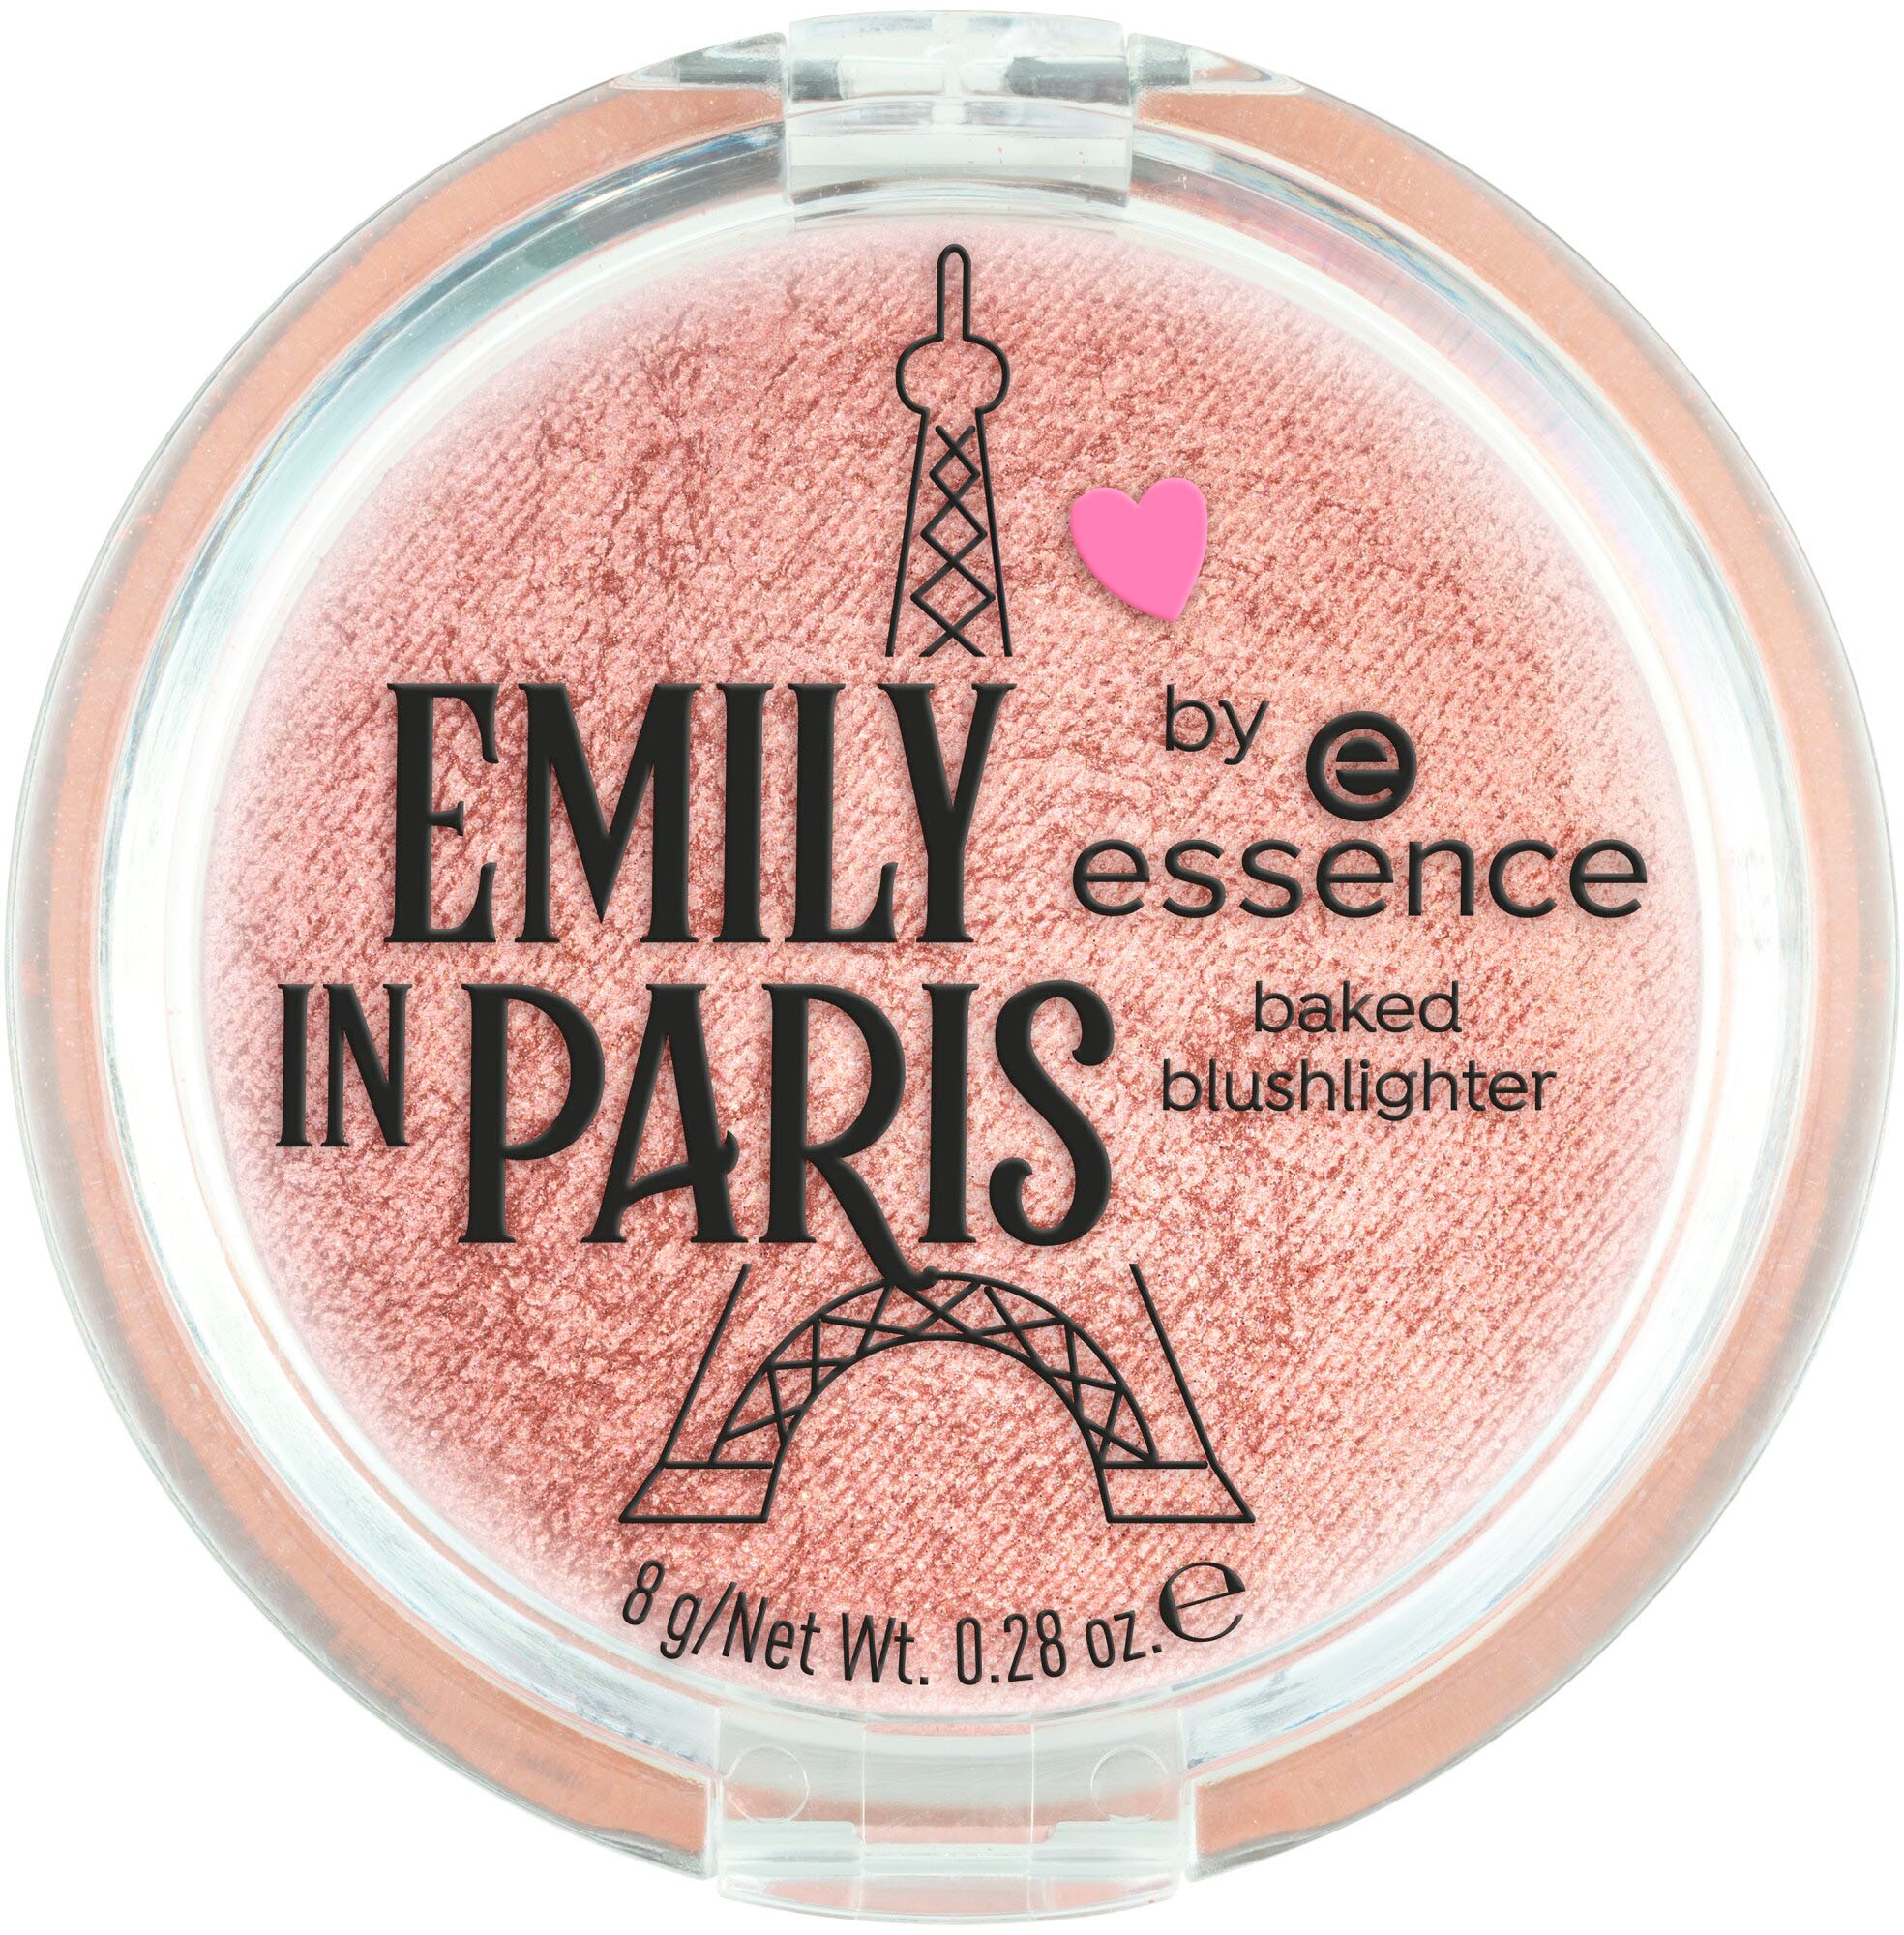 Rouge online blushlighter« IN essence »EMILY PARIS by baked Essence bei